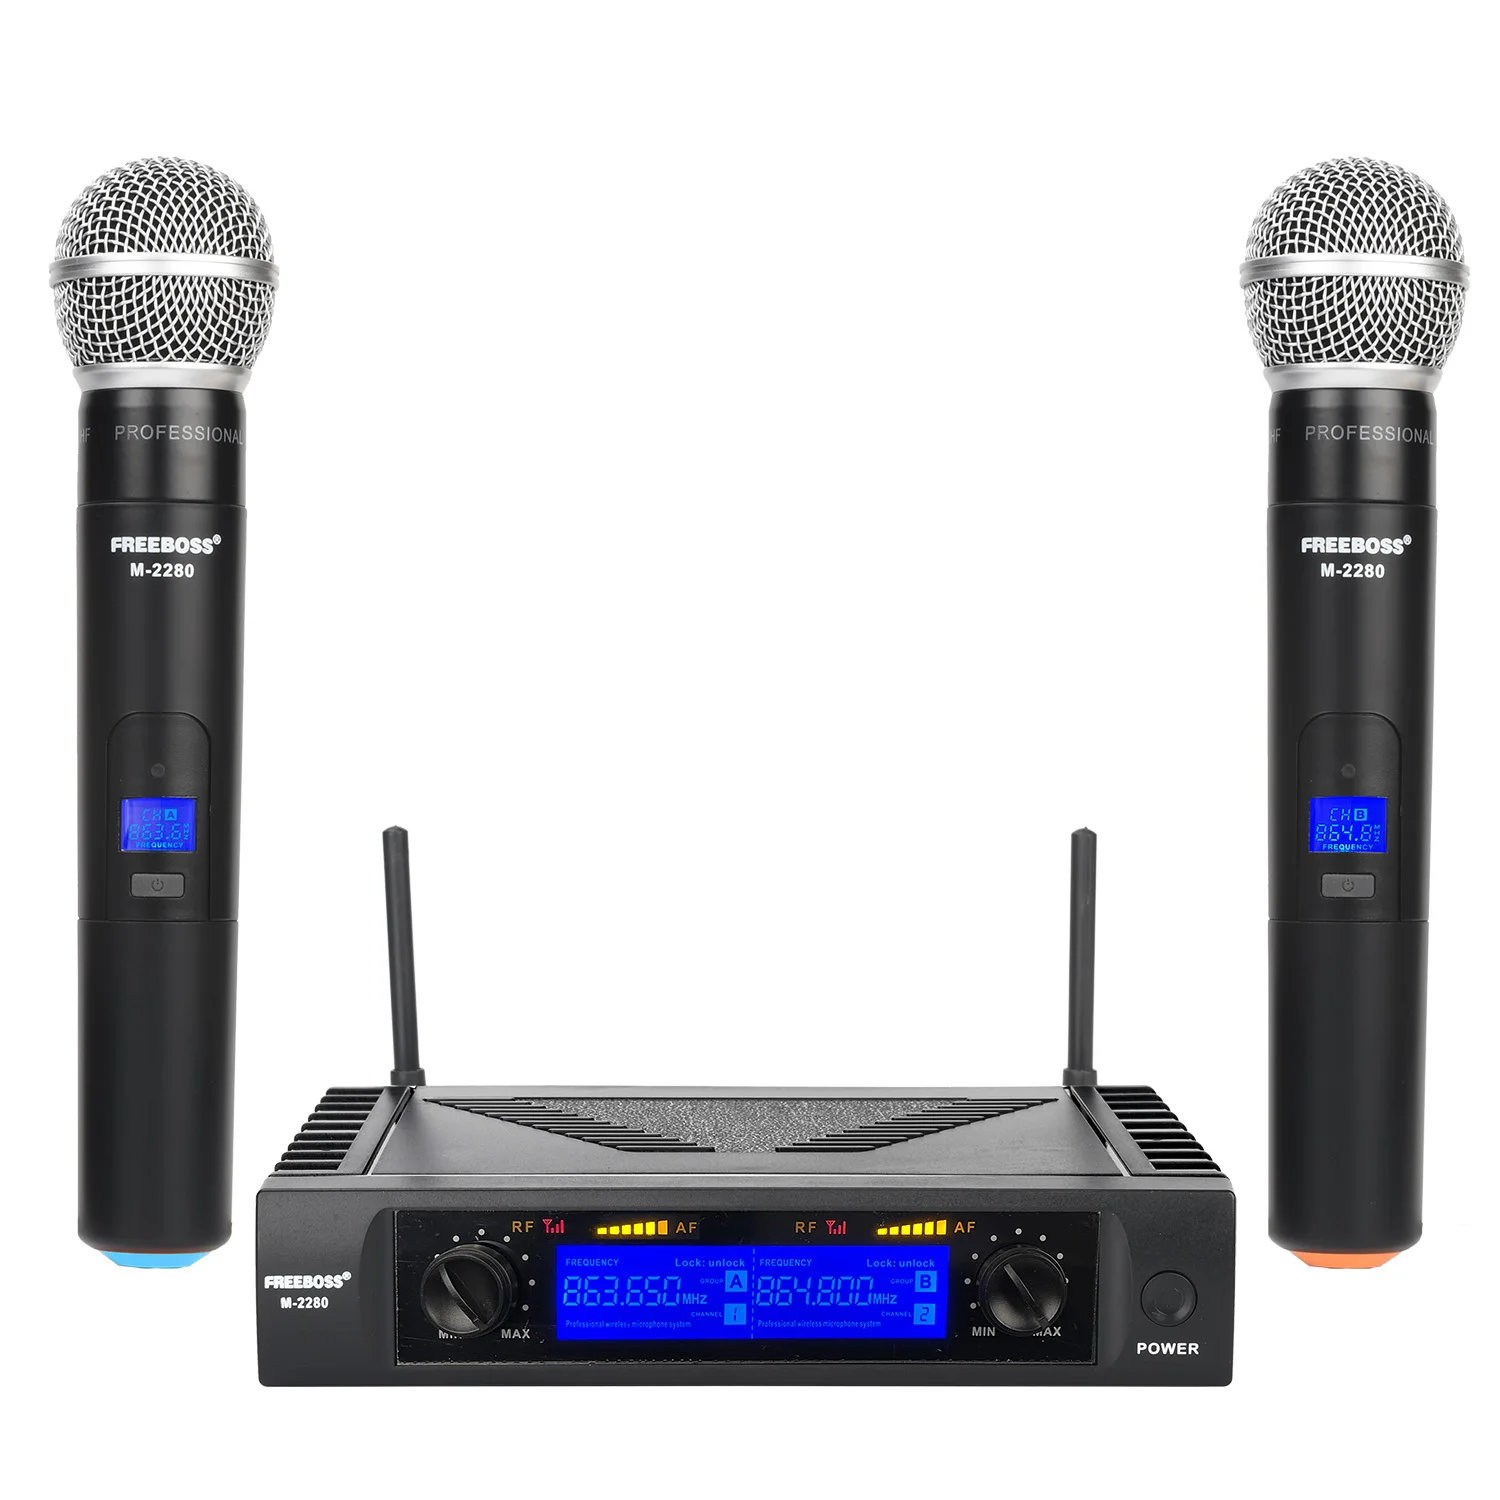 

Metal Base Wireless Microphone 2 Channels 50M Distance UHF Fixed Frequency Karaoke Mic For Churh School Family Party M-2280